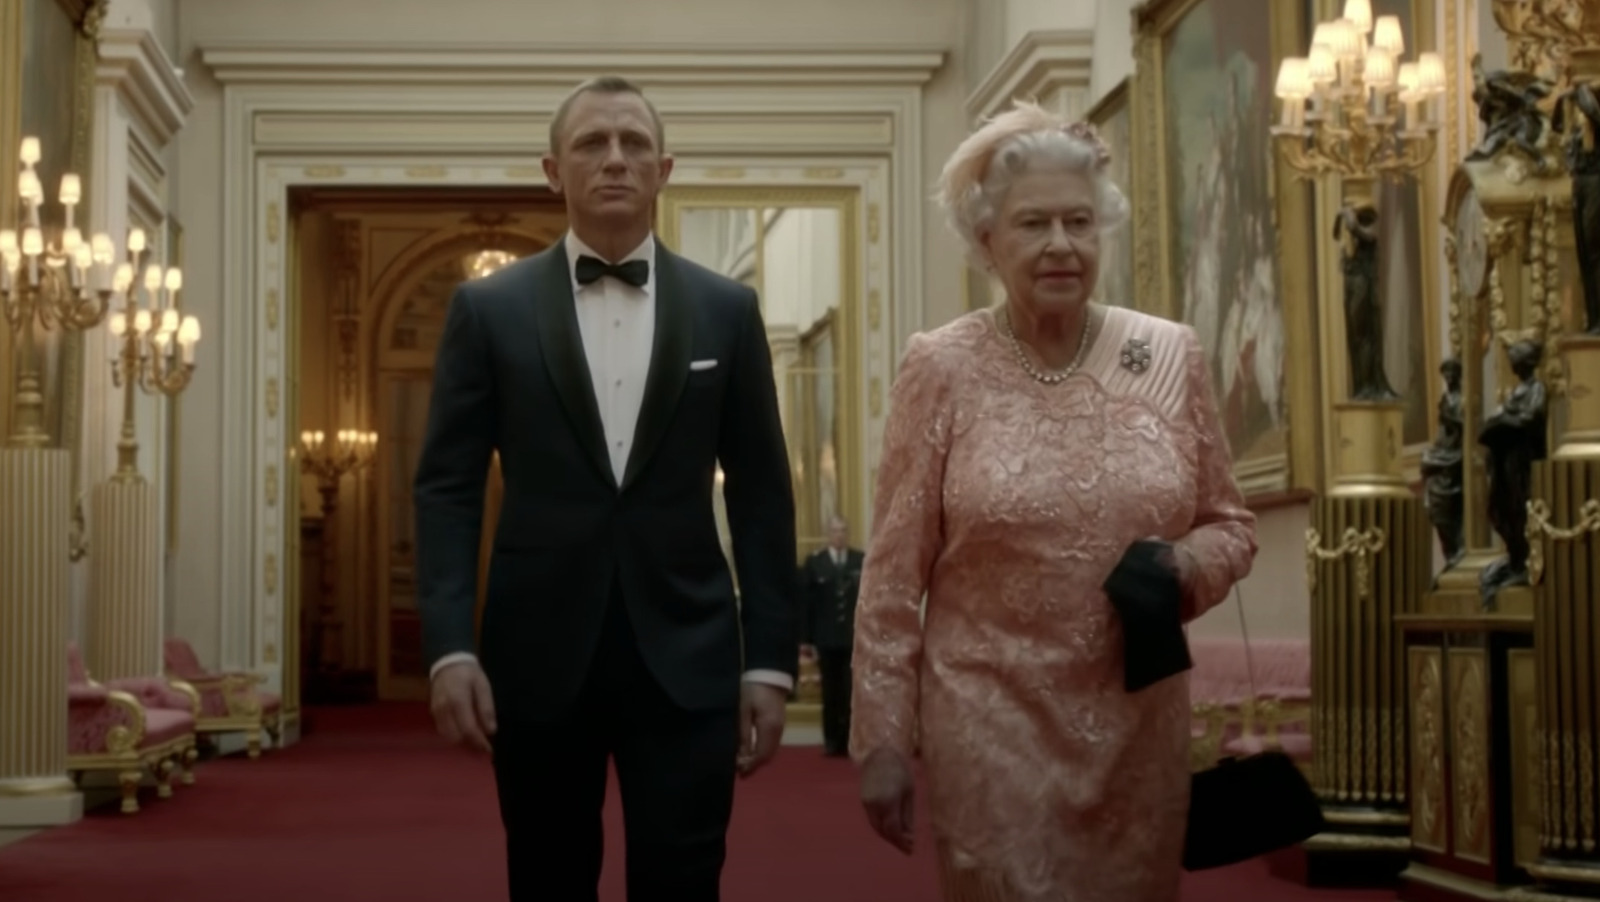 Here's how the James Bond franchise will incorporate the passing of Queen Elizabeth II